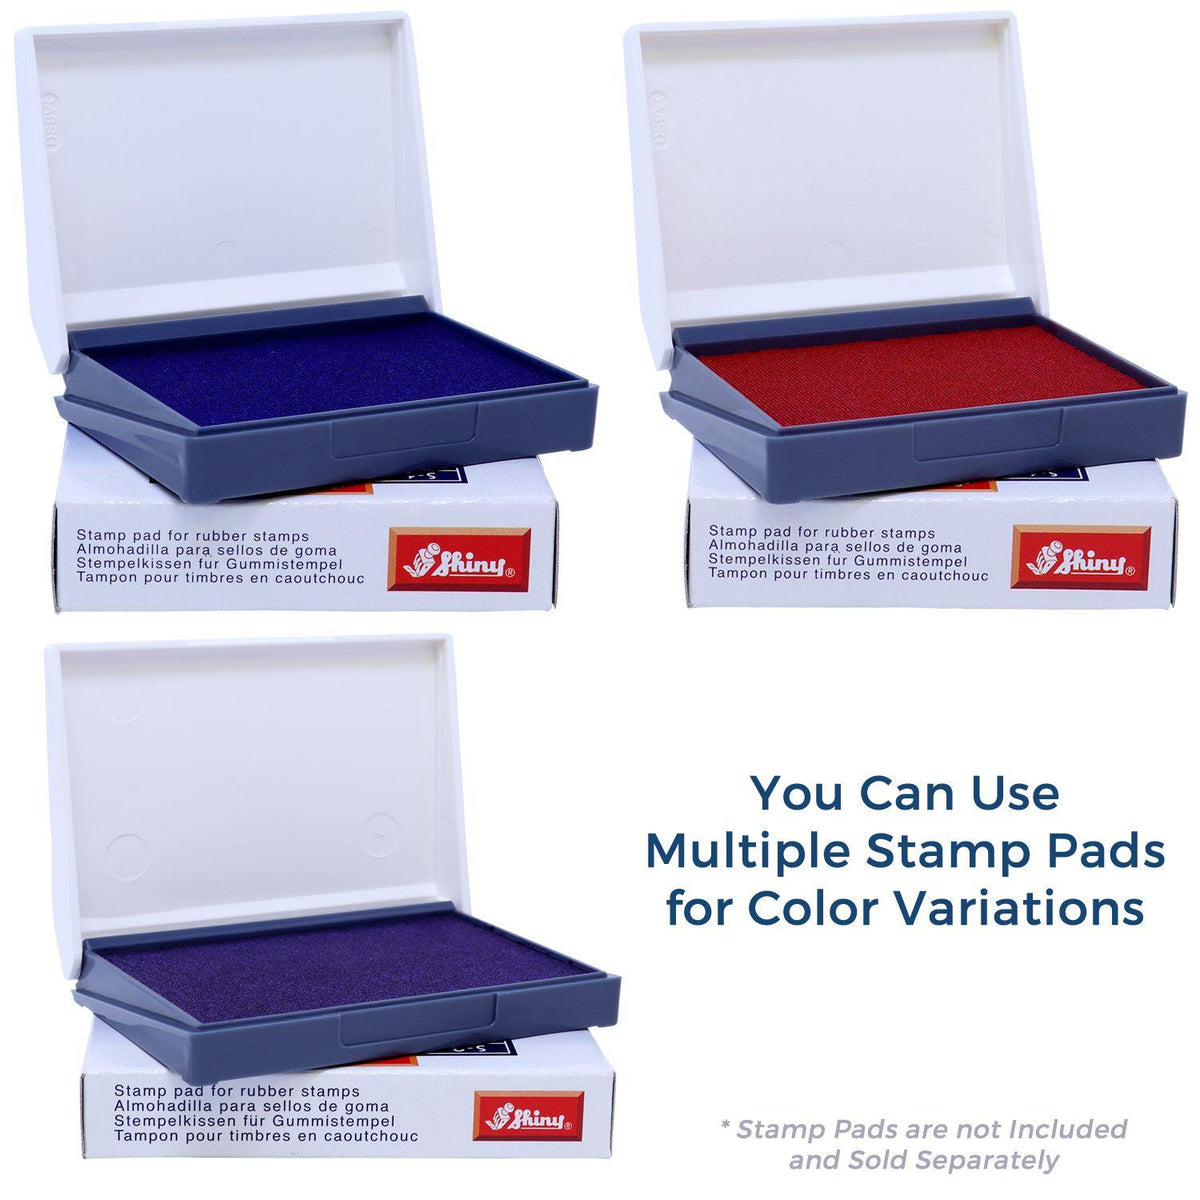 Stamp Pads for Completed Rubber Stamp Available